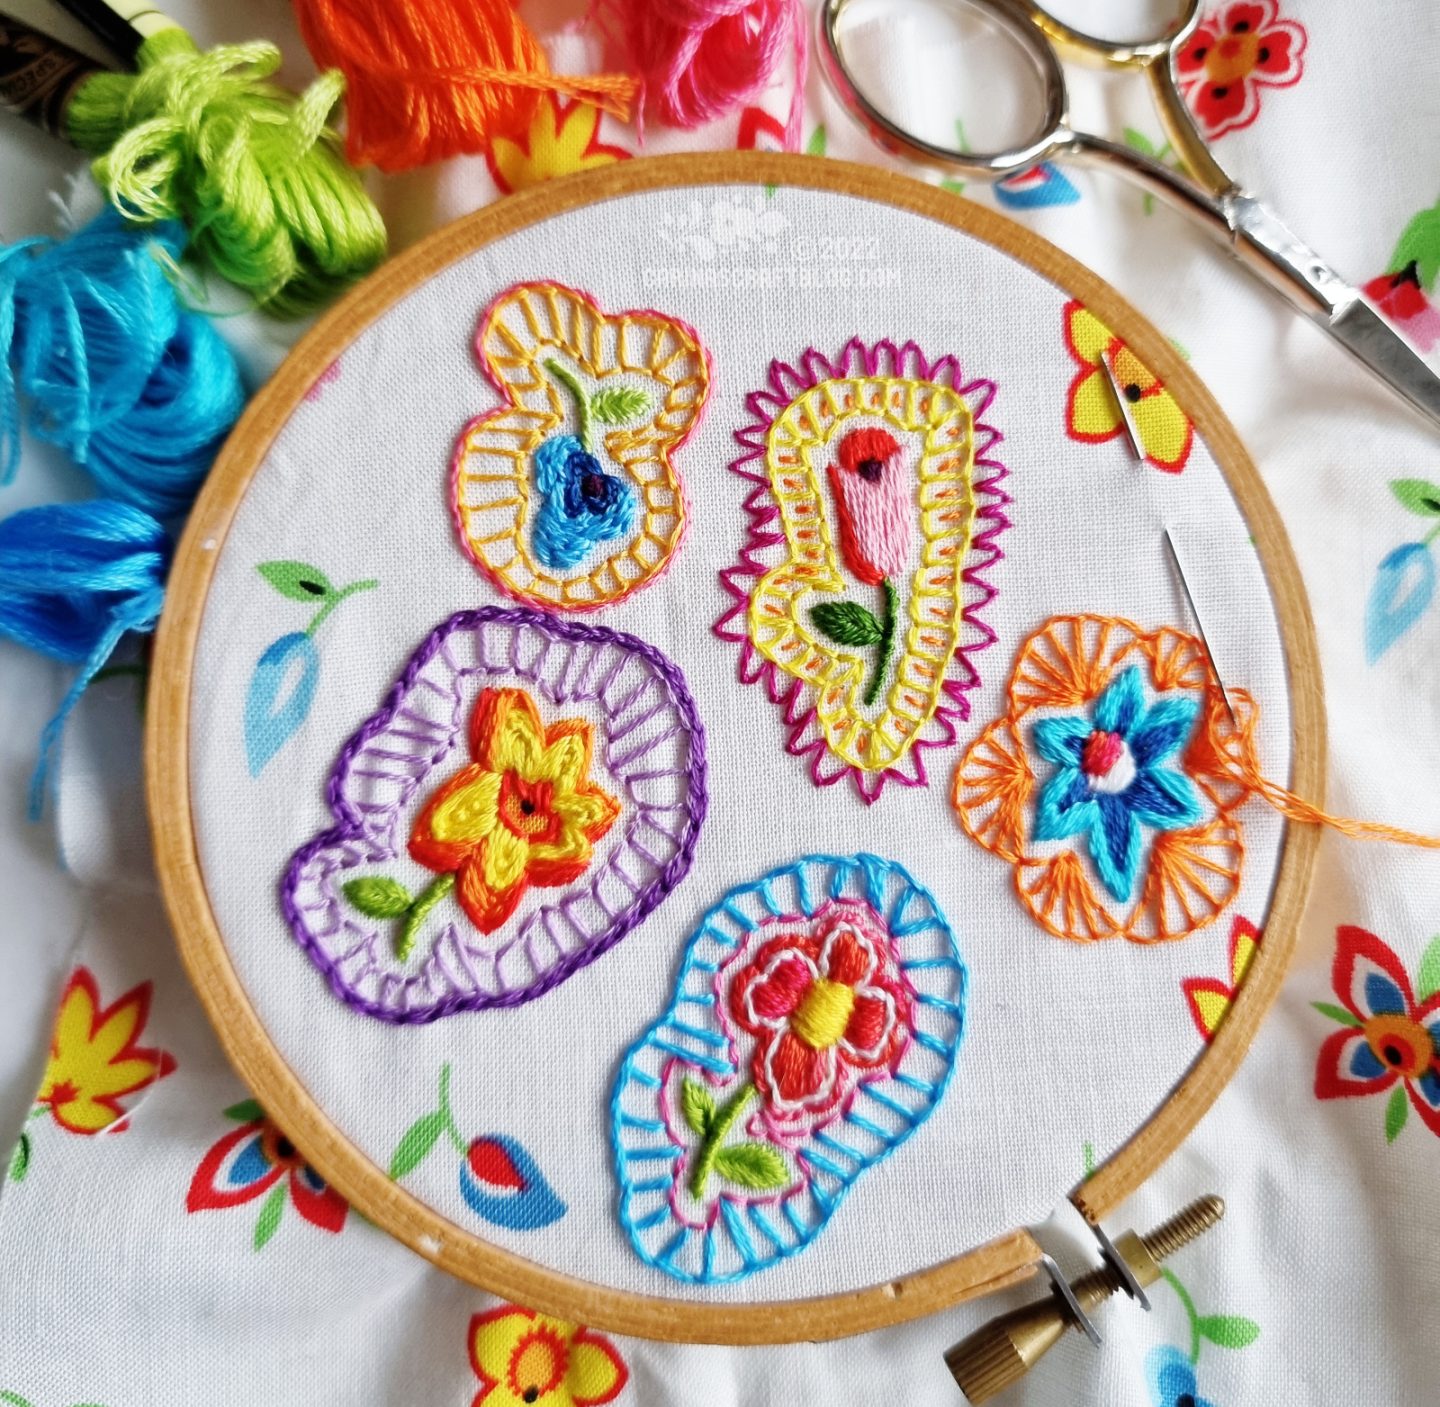 Overhead view of small embroidery hoop. In the hoop is fabric with a white base colour and flowers printed on it. Some of the flowers have been covered with hand embroidery.